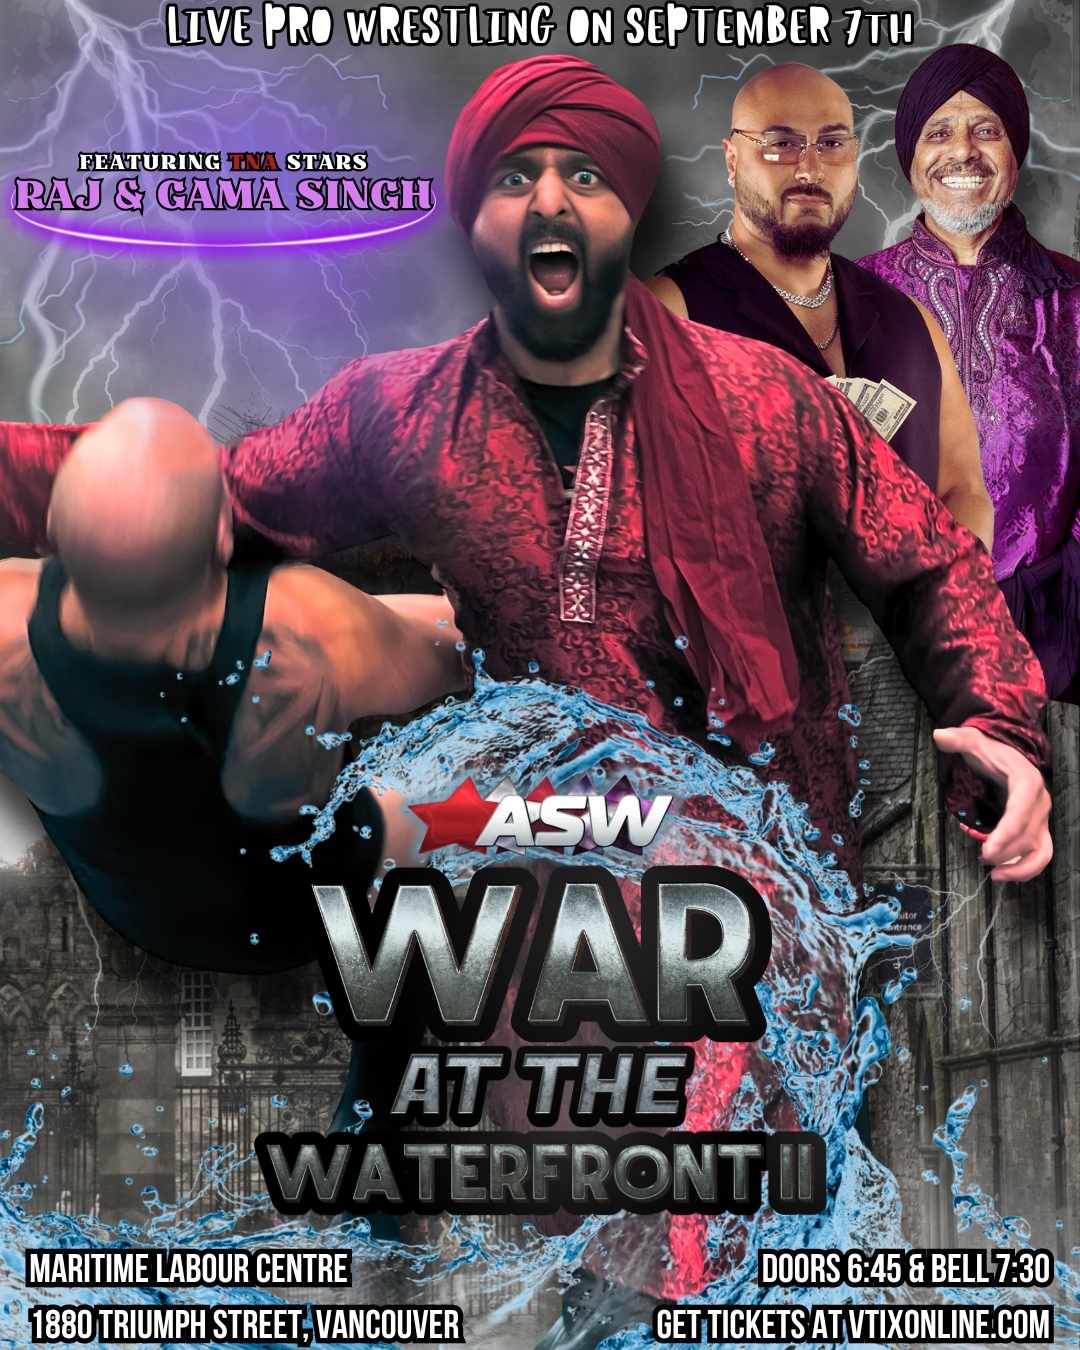 ALL STAR WRESTLING PRESENTS WAR AT THE WATERFRONT II